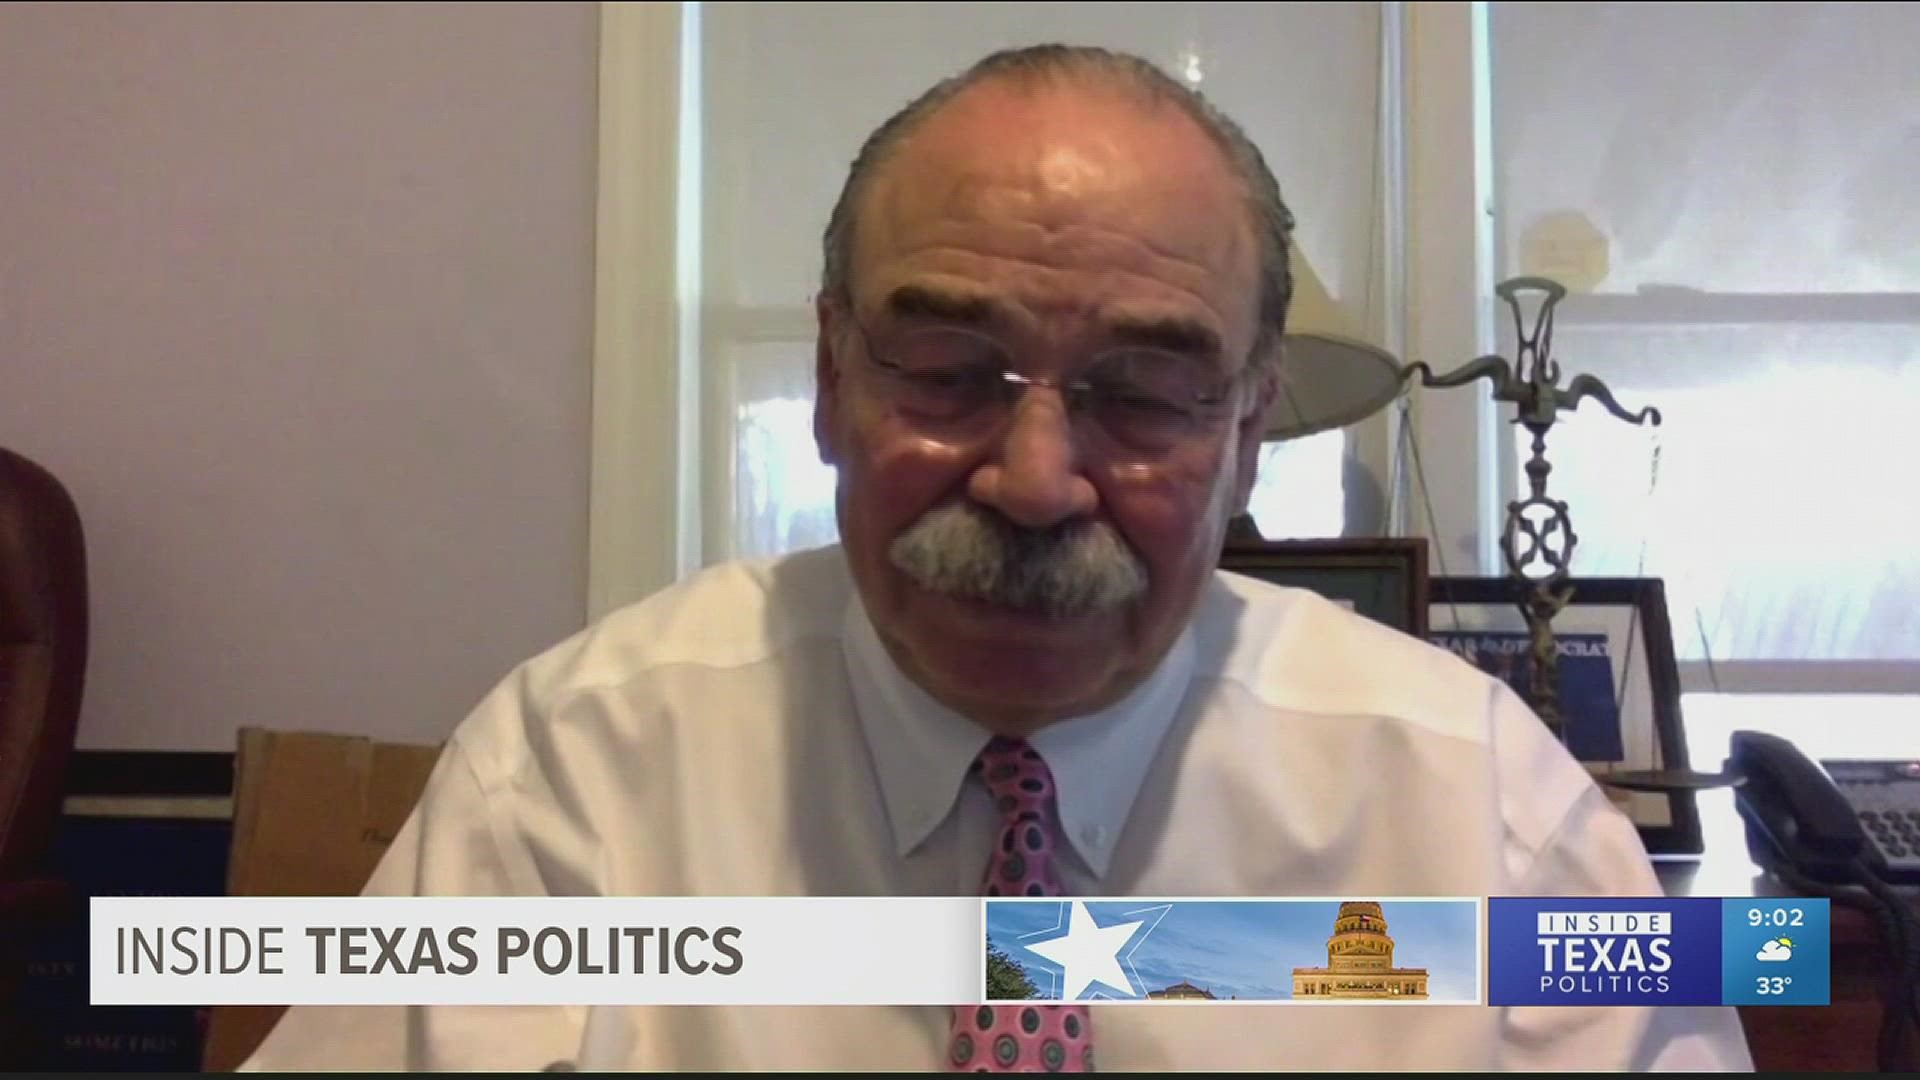 Hinojosa says turning Texas blue is not an event -- it’s a process.